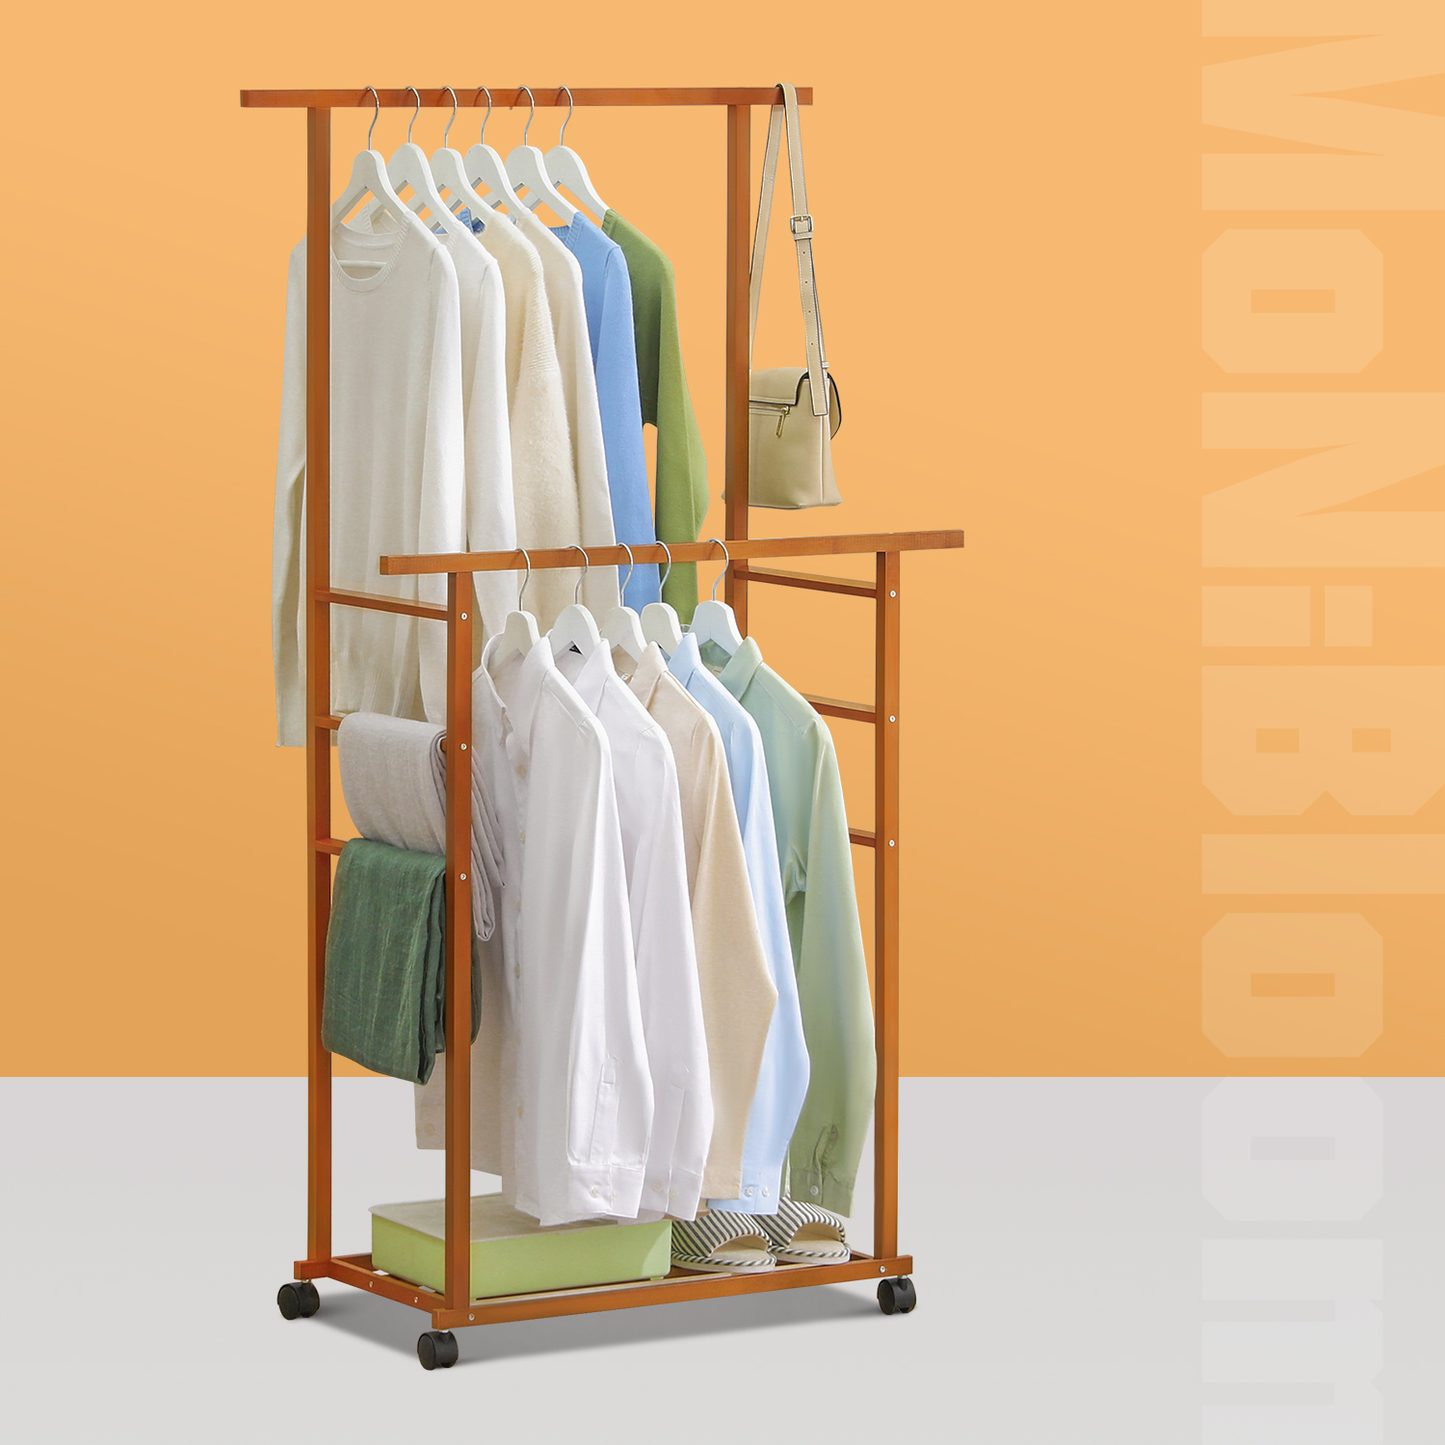 Sliding Garment Double Hanging Clothes Rack - Brown